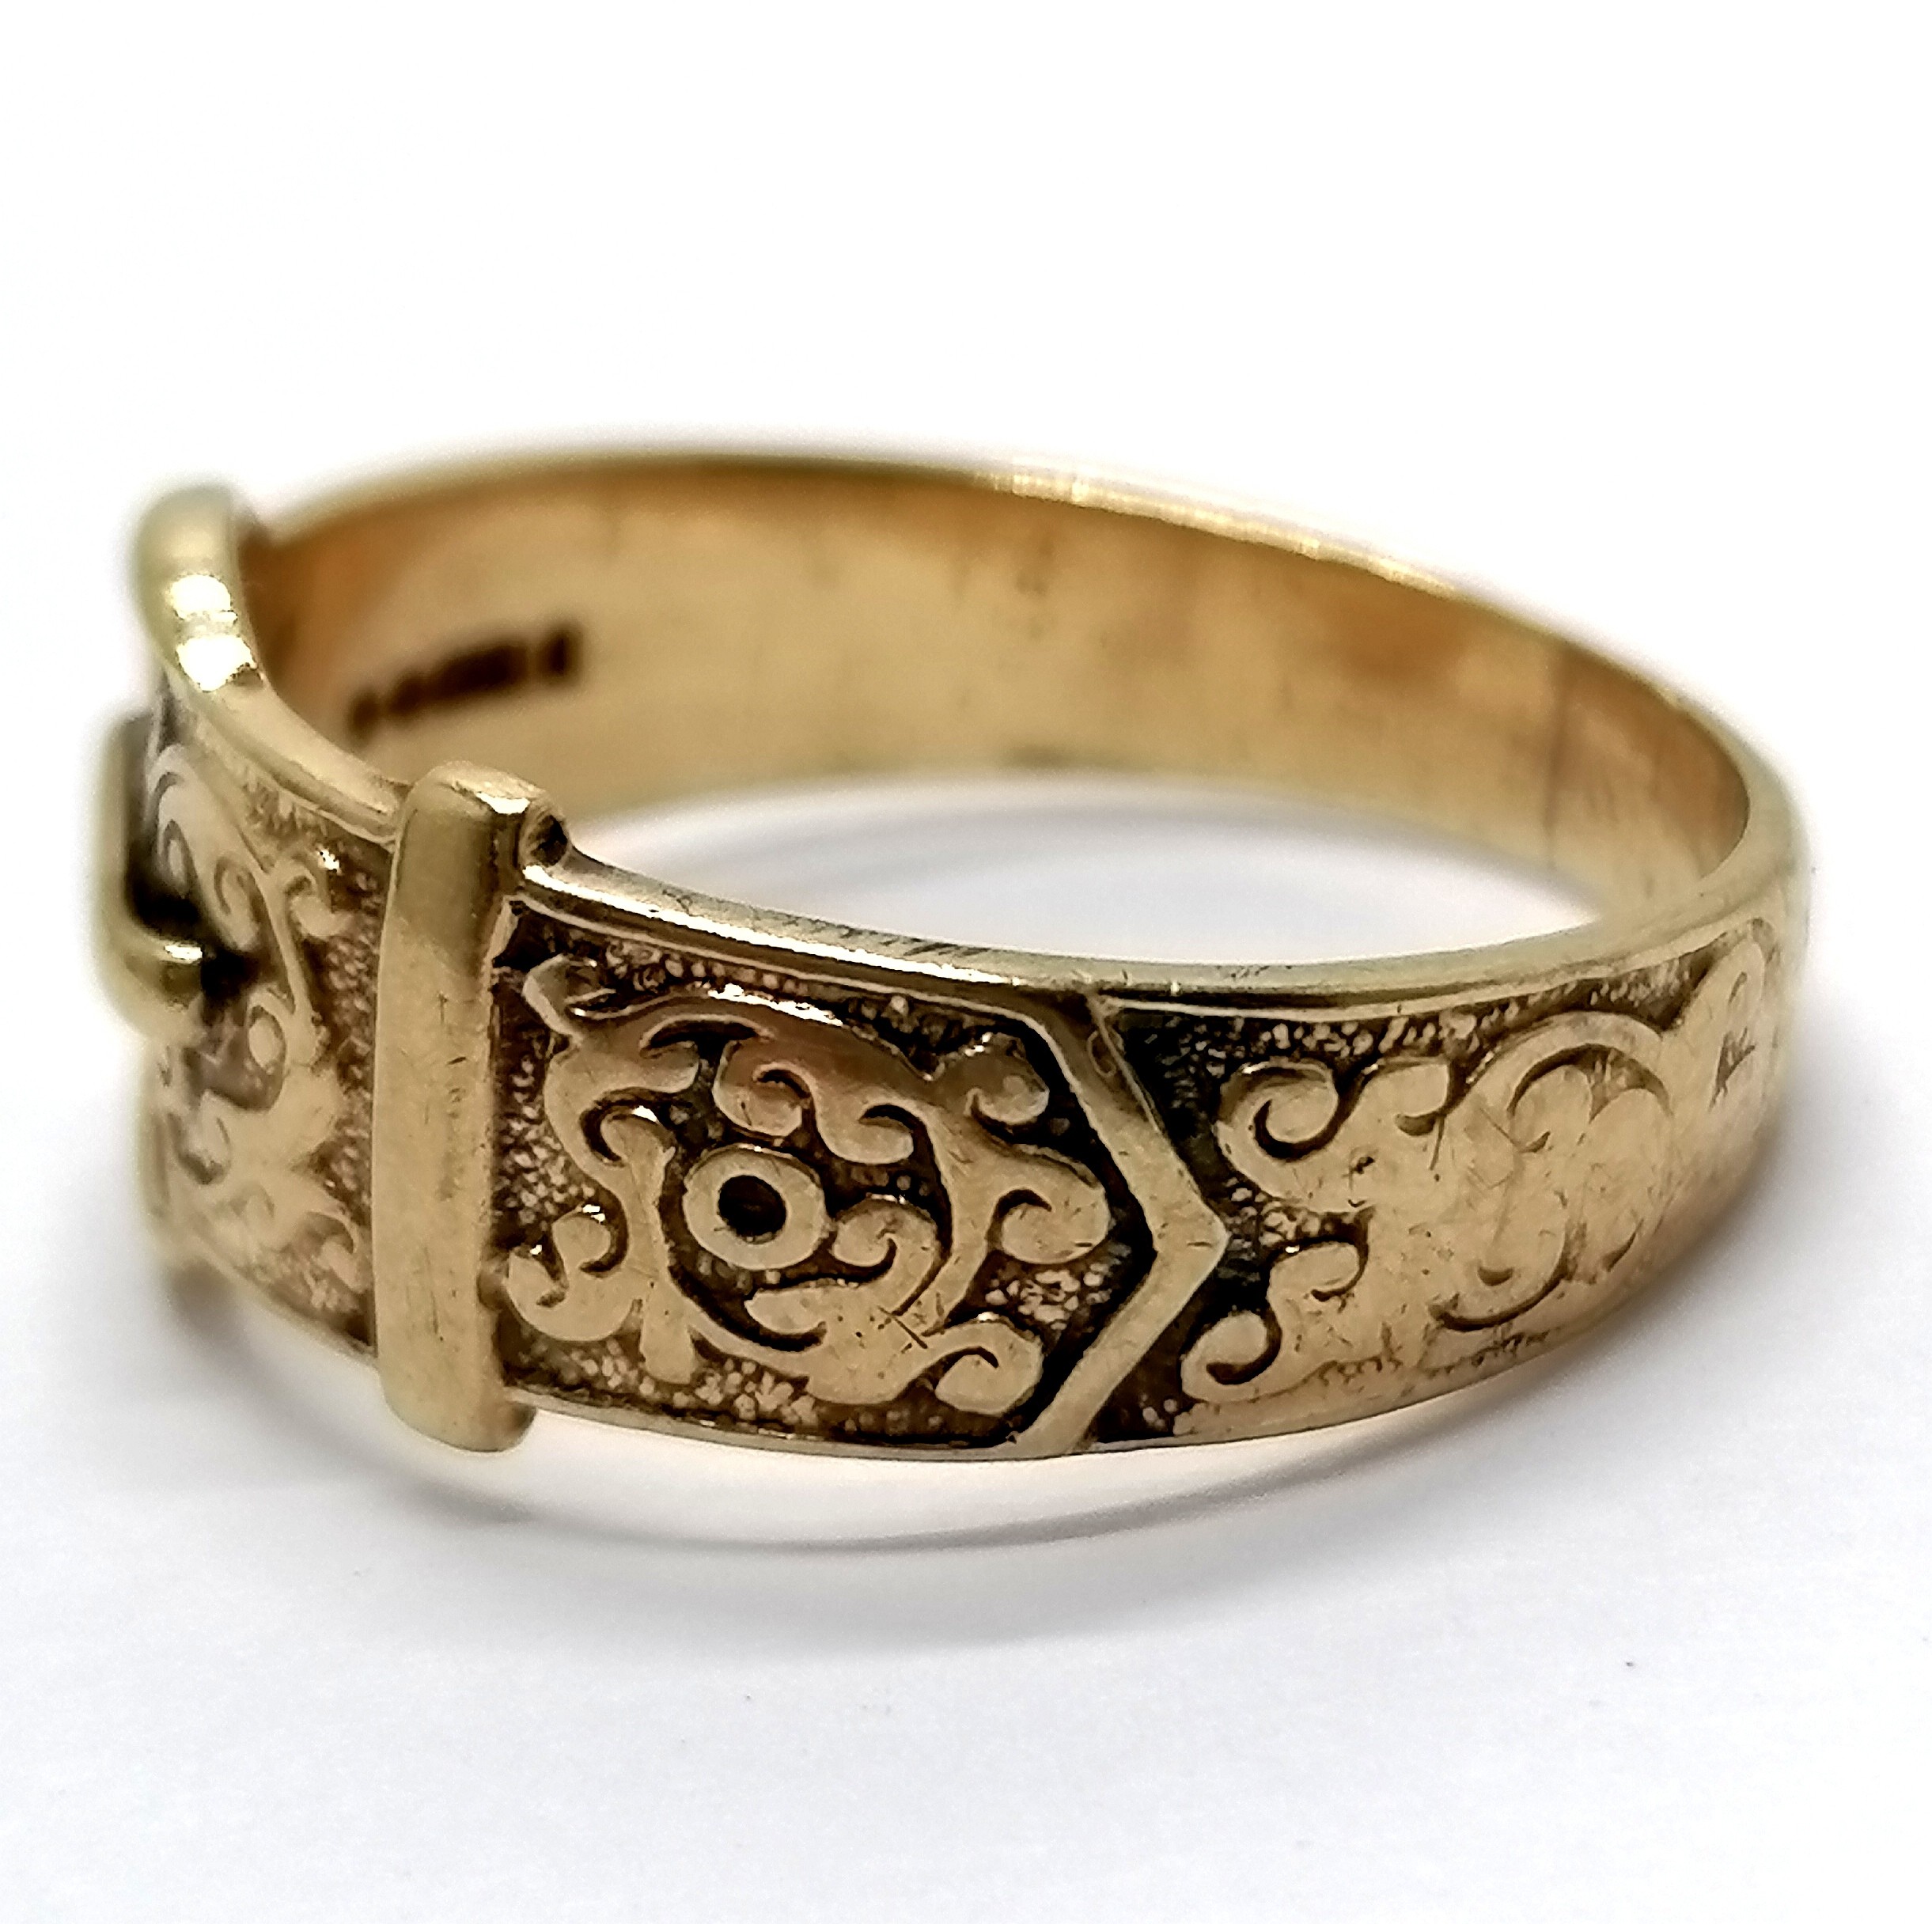 9ct hallmarked gold buckle ring with engraved decoration - size V & 5.5g - Image 3 of 3